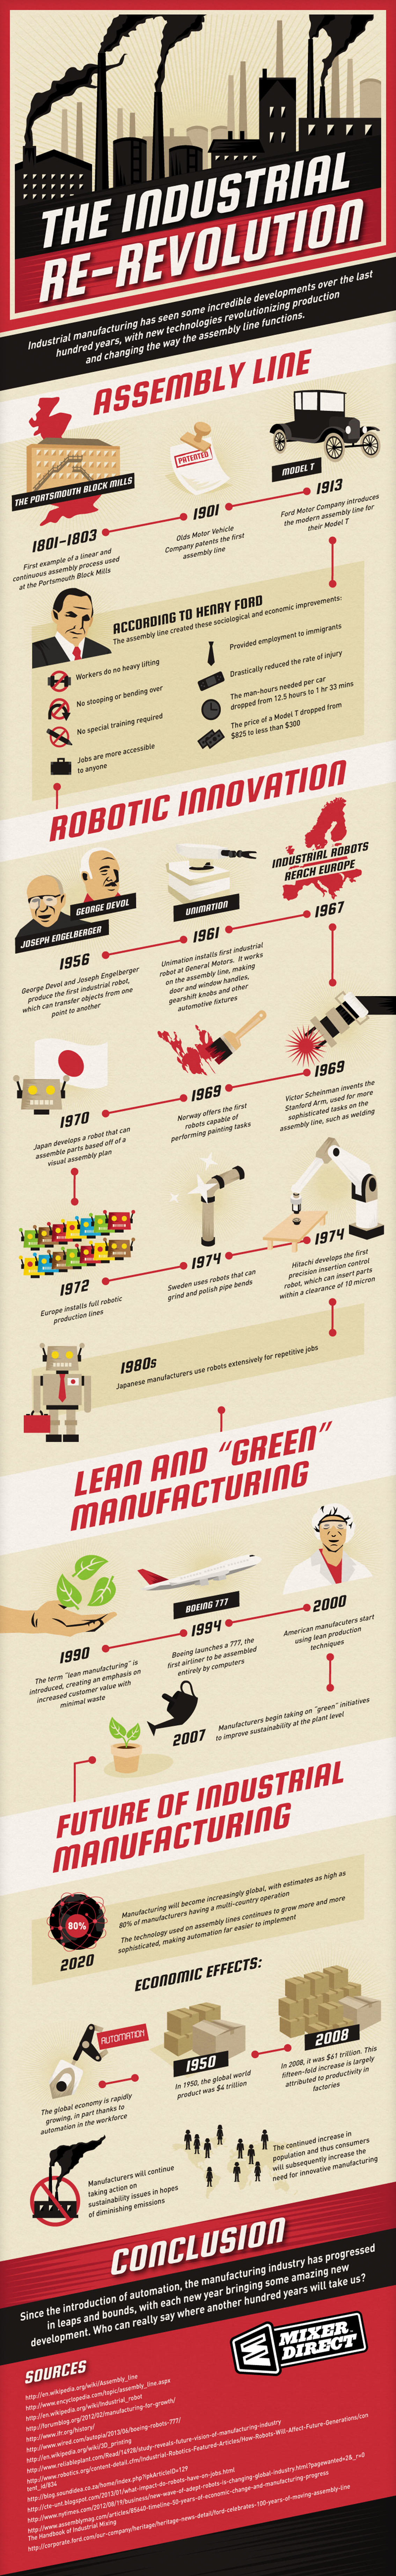 A Visit to Manufacturing Industry Infographic